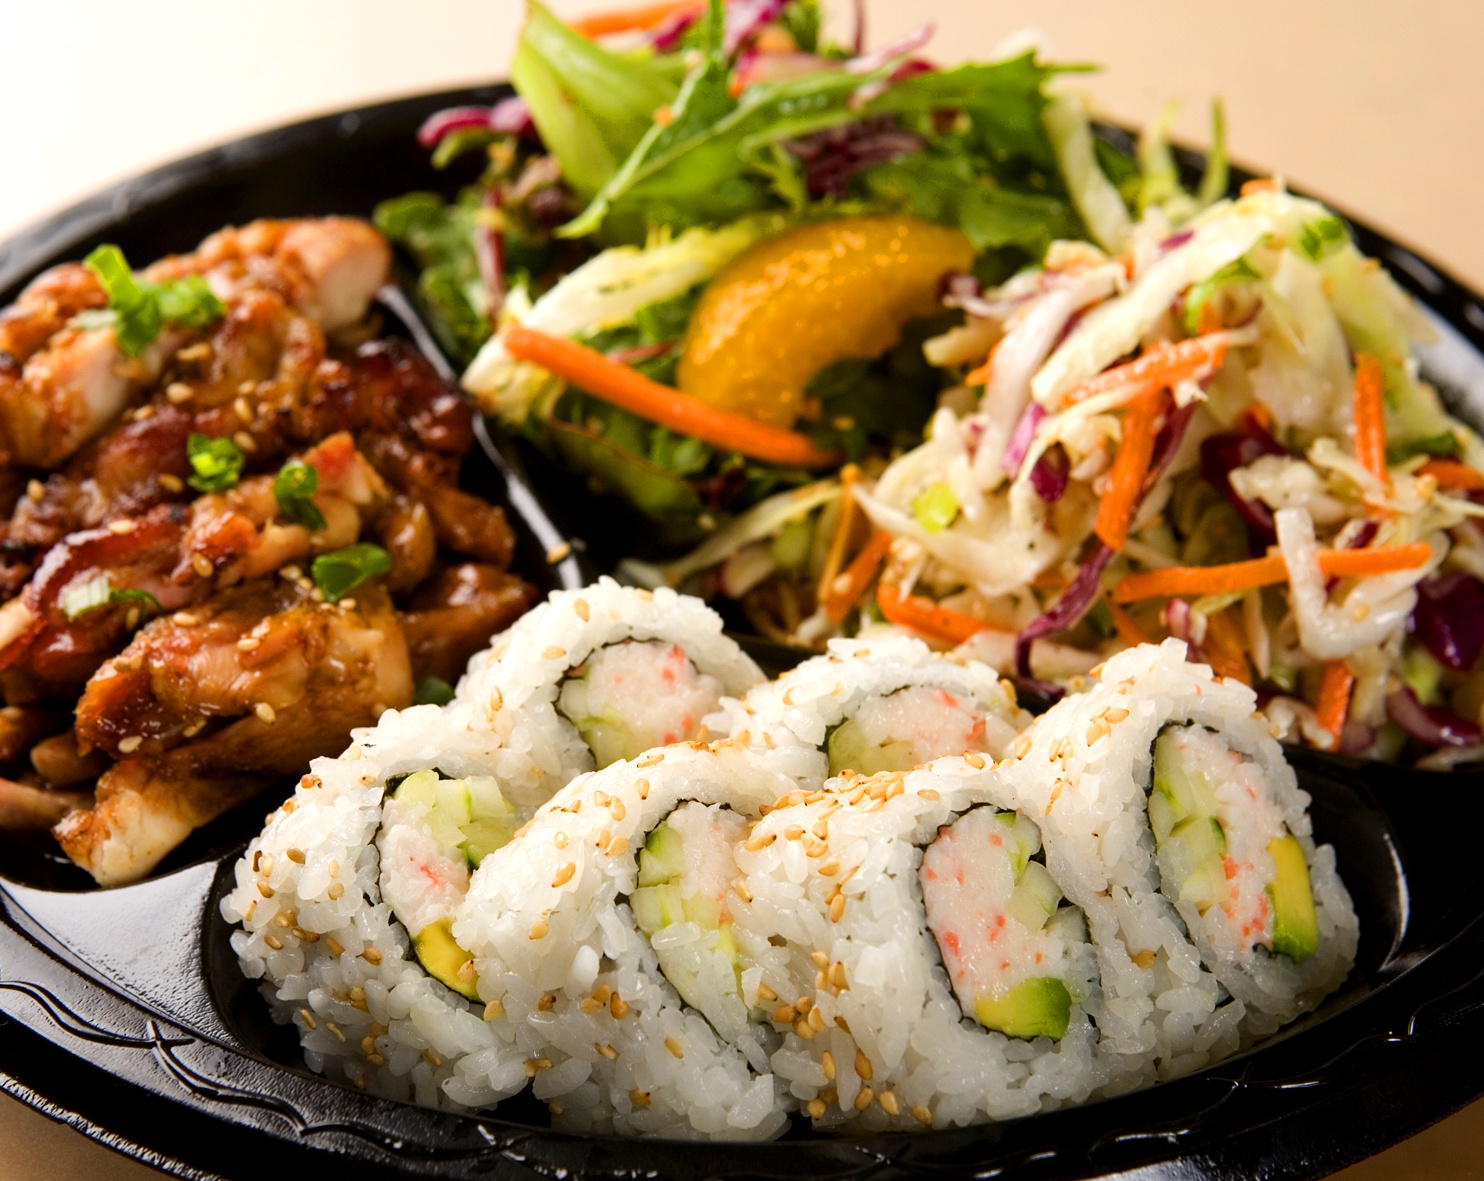 California Roll (6pcs) and Chicken Plate